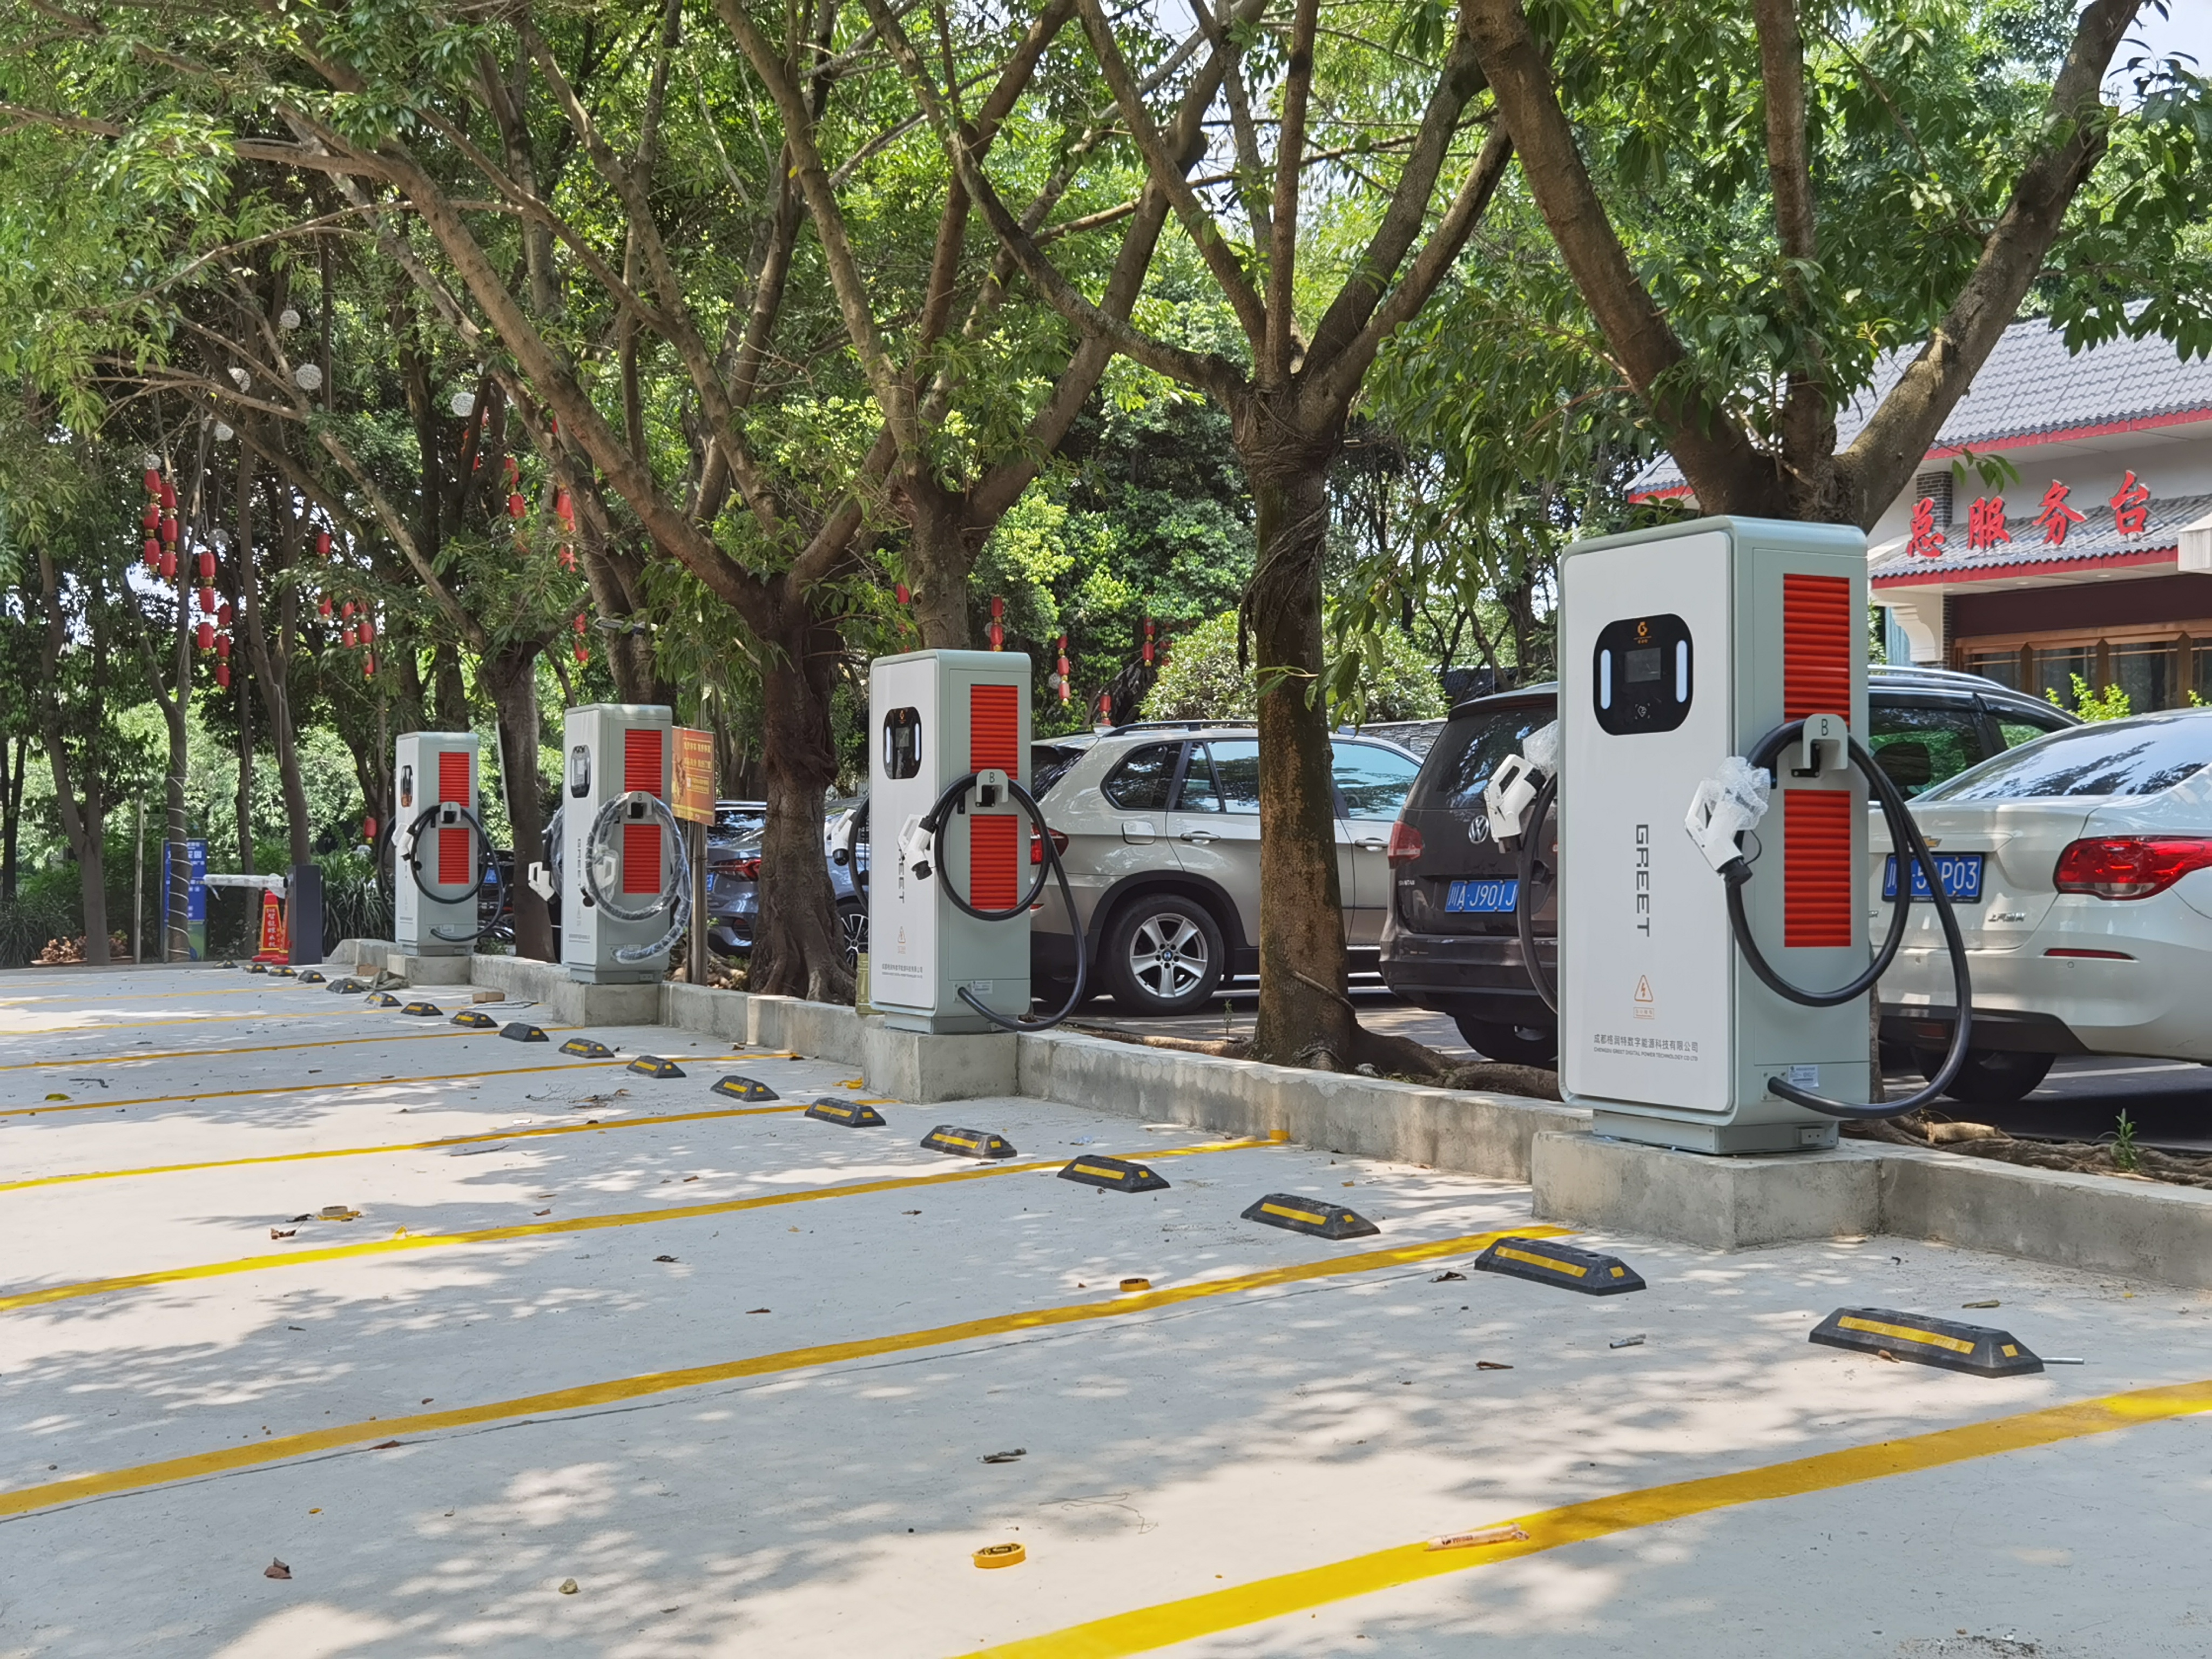 "2023 China Electric Vehicle User Charging Behavior Study Report: Key Insights and Trends"